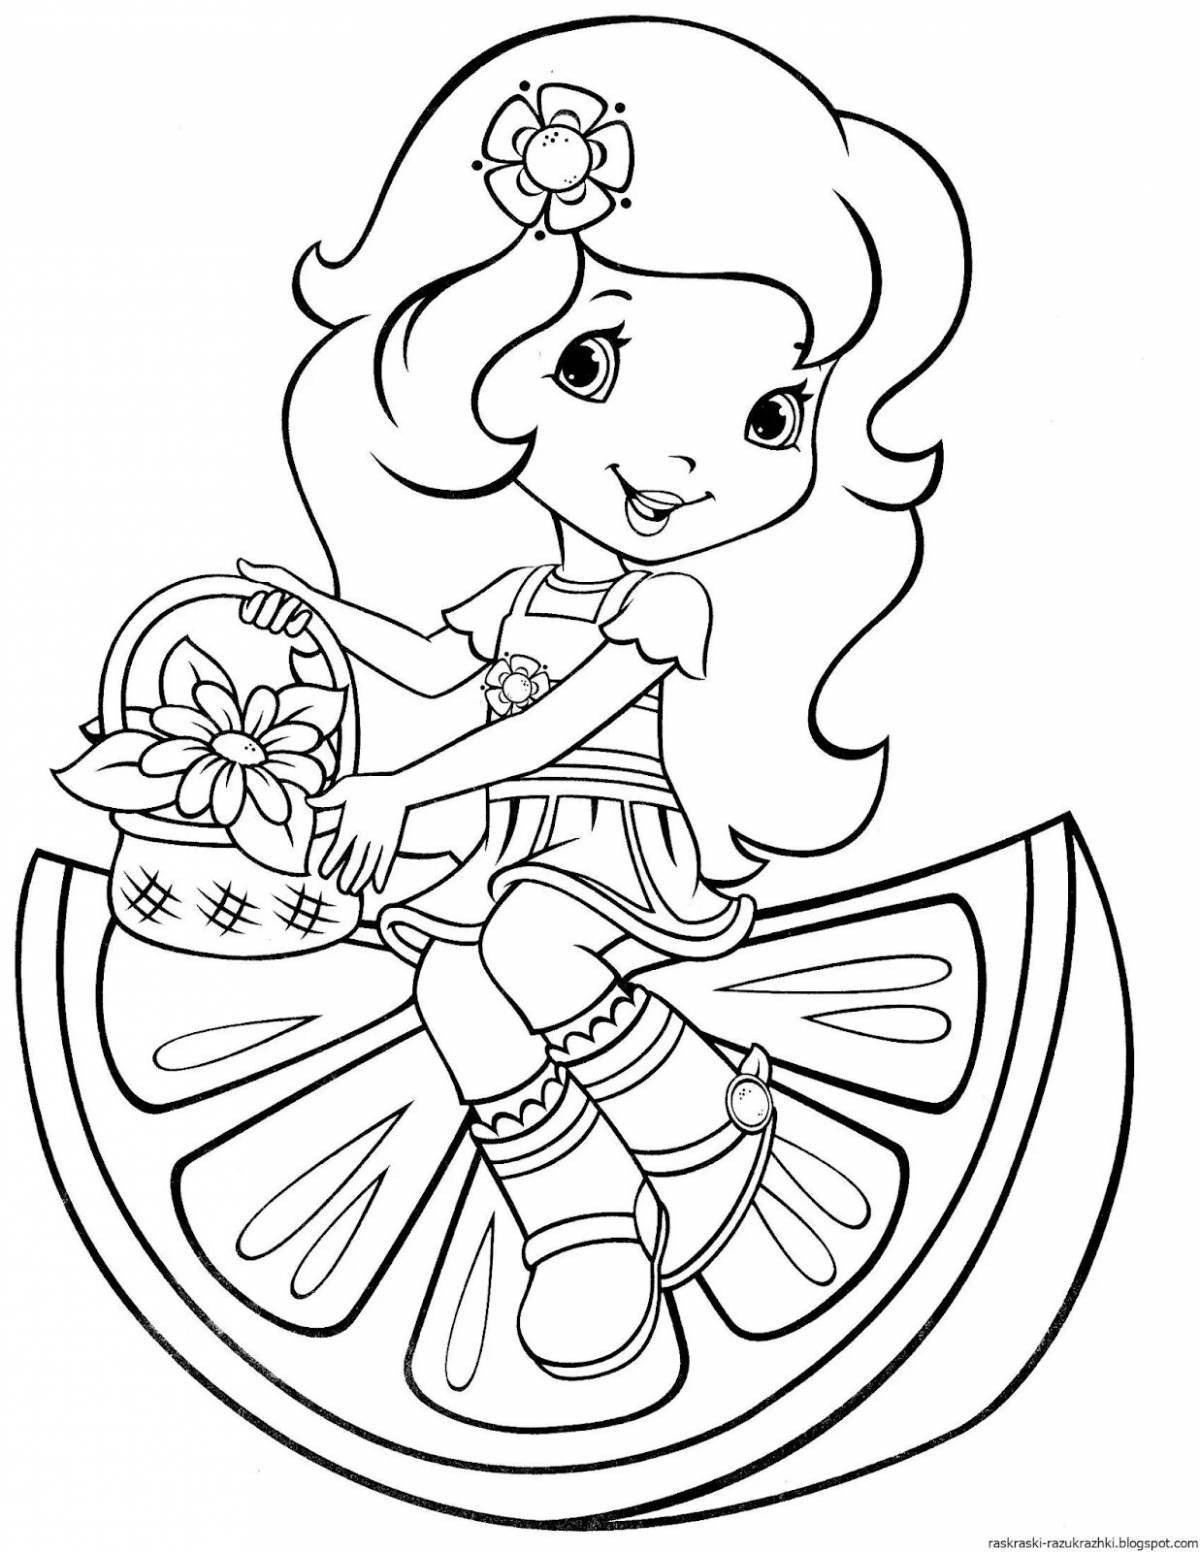 Adorable coloring book for girls 6-7 years old